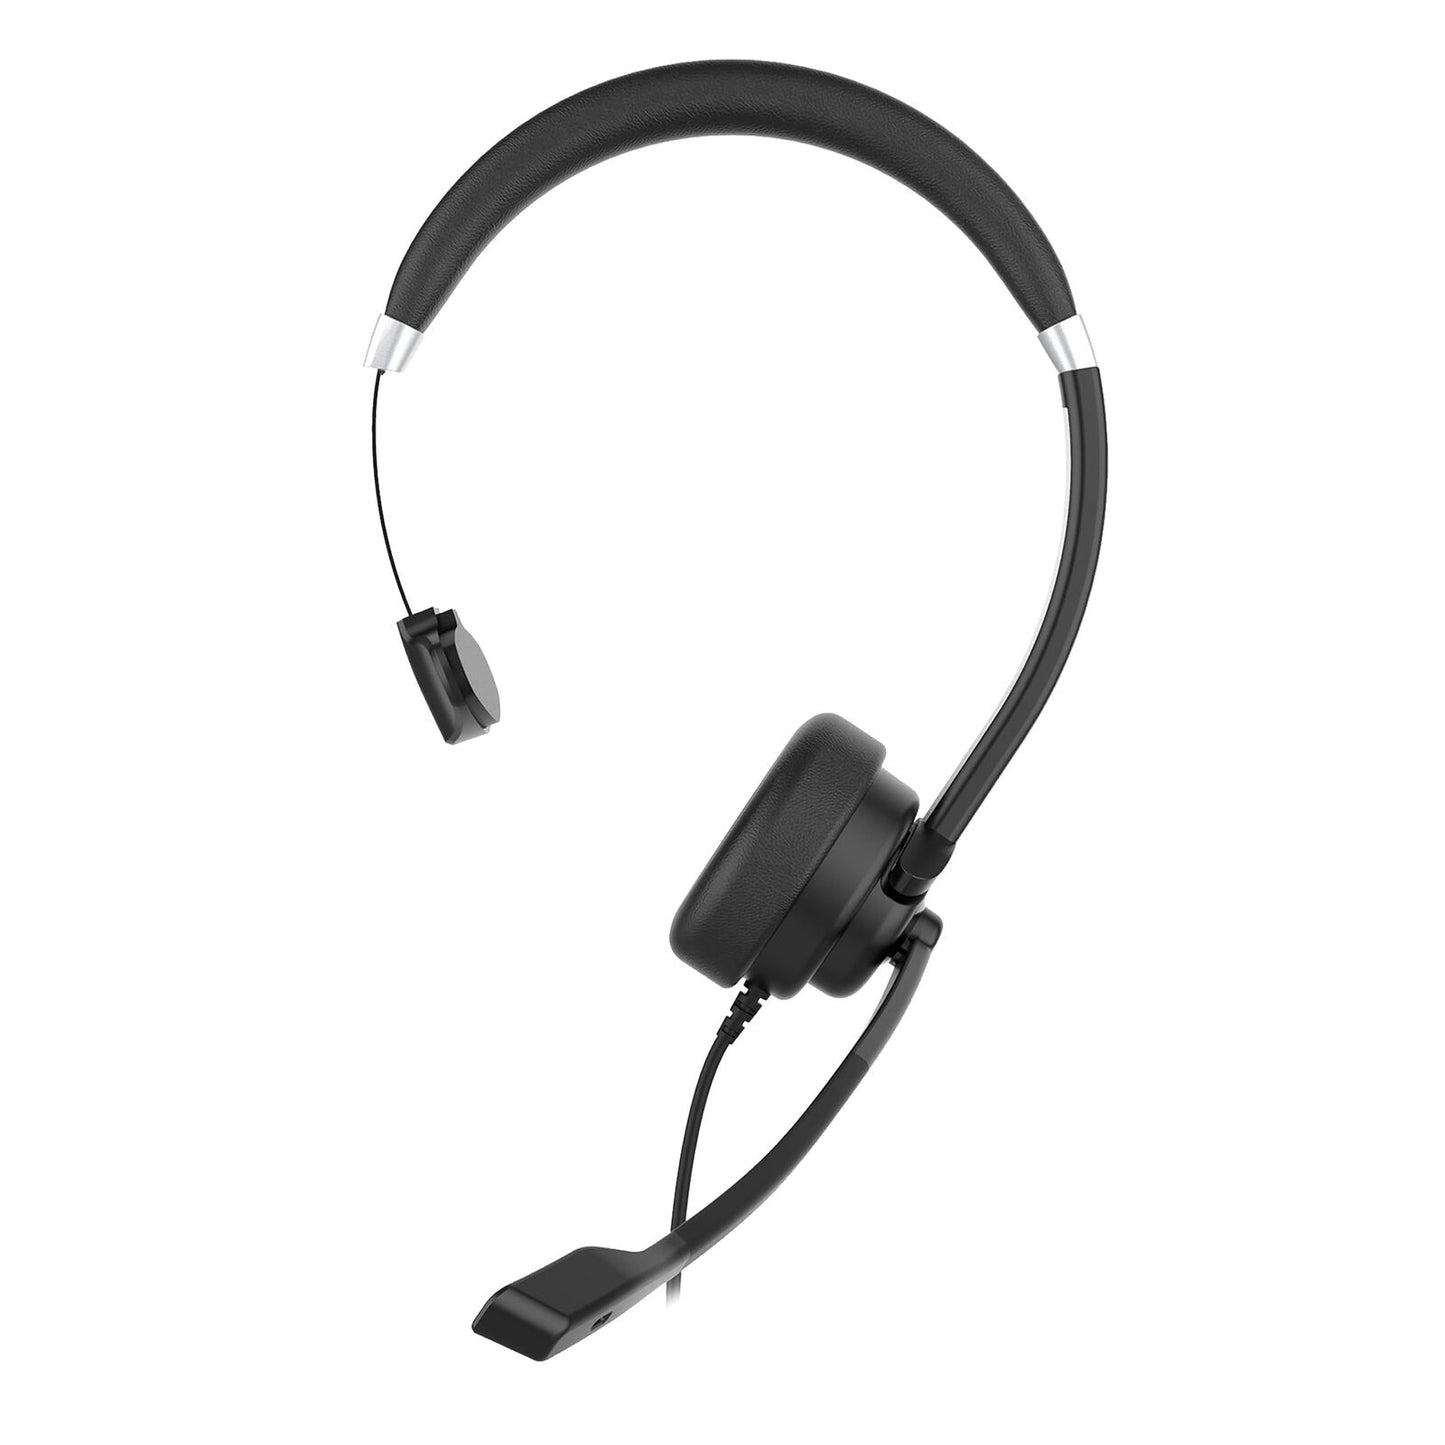 Morpheus 360 Connect USB Mono Headset with Boom Microphone - Noise Cancelling -